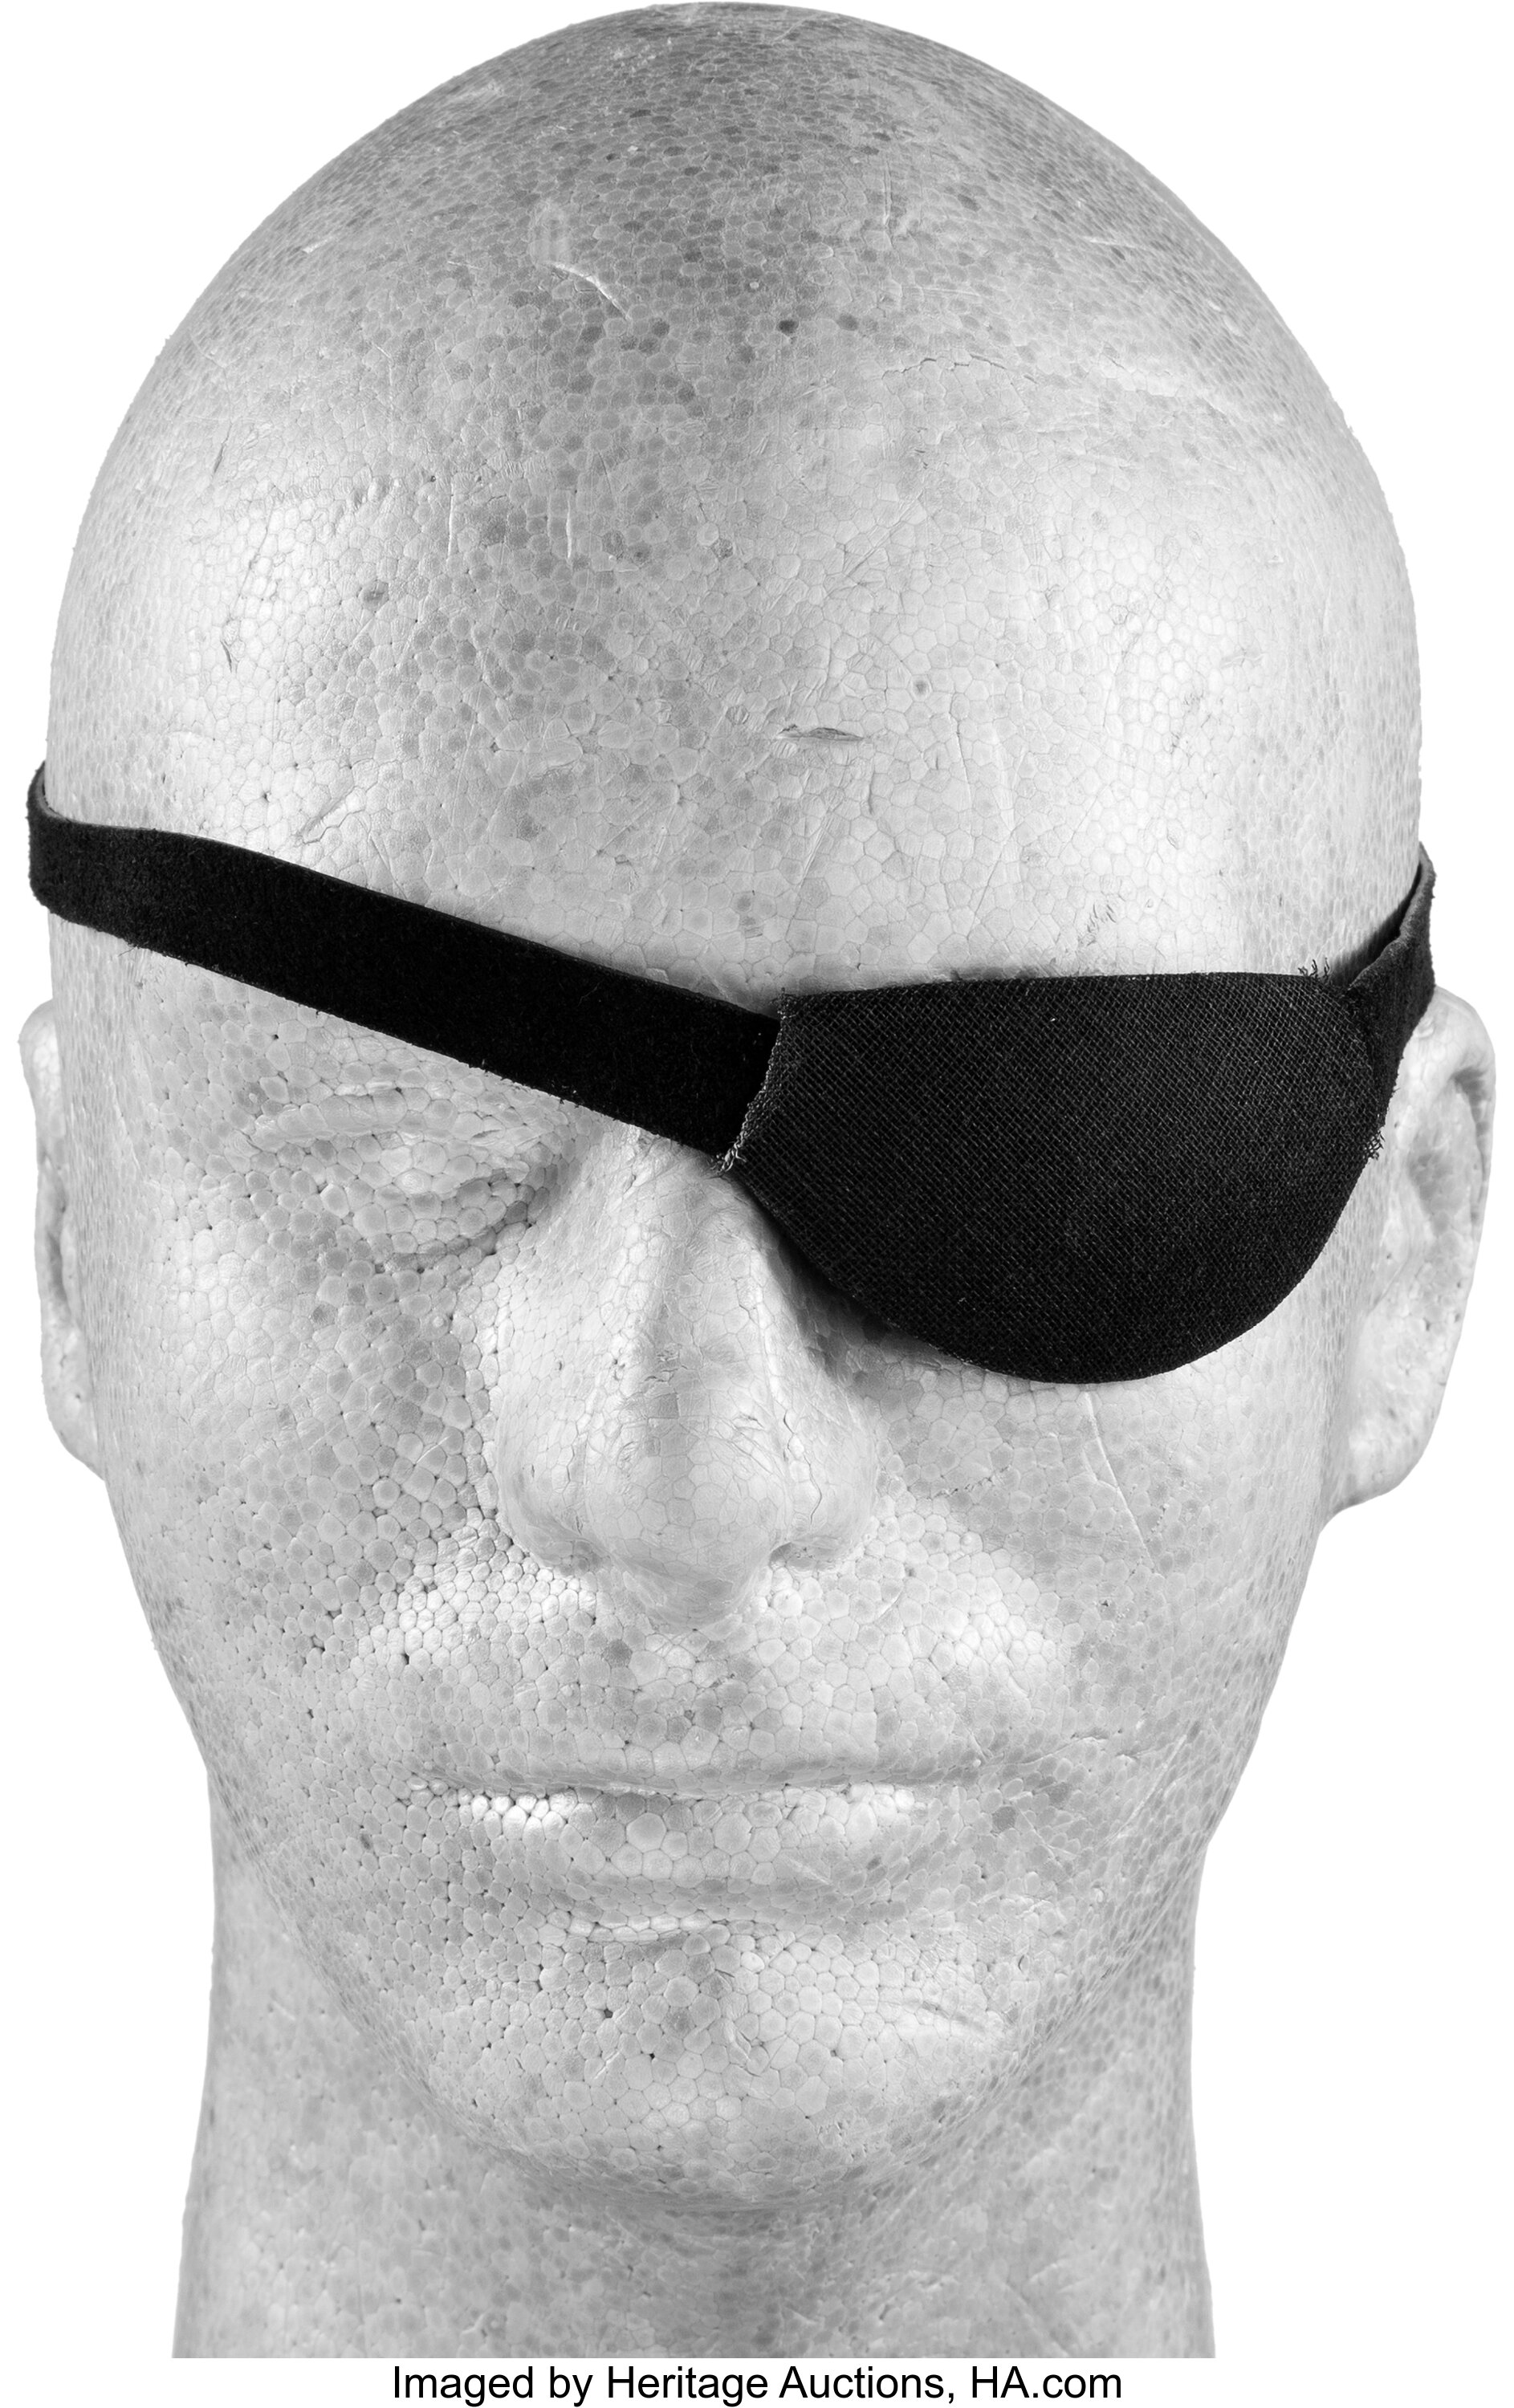 John Wayne Eye Patch From Rooster Cogburn Universal 1975 Lot 025 Heritage Auctions